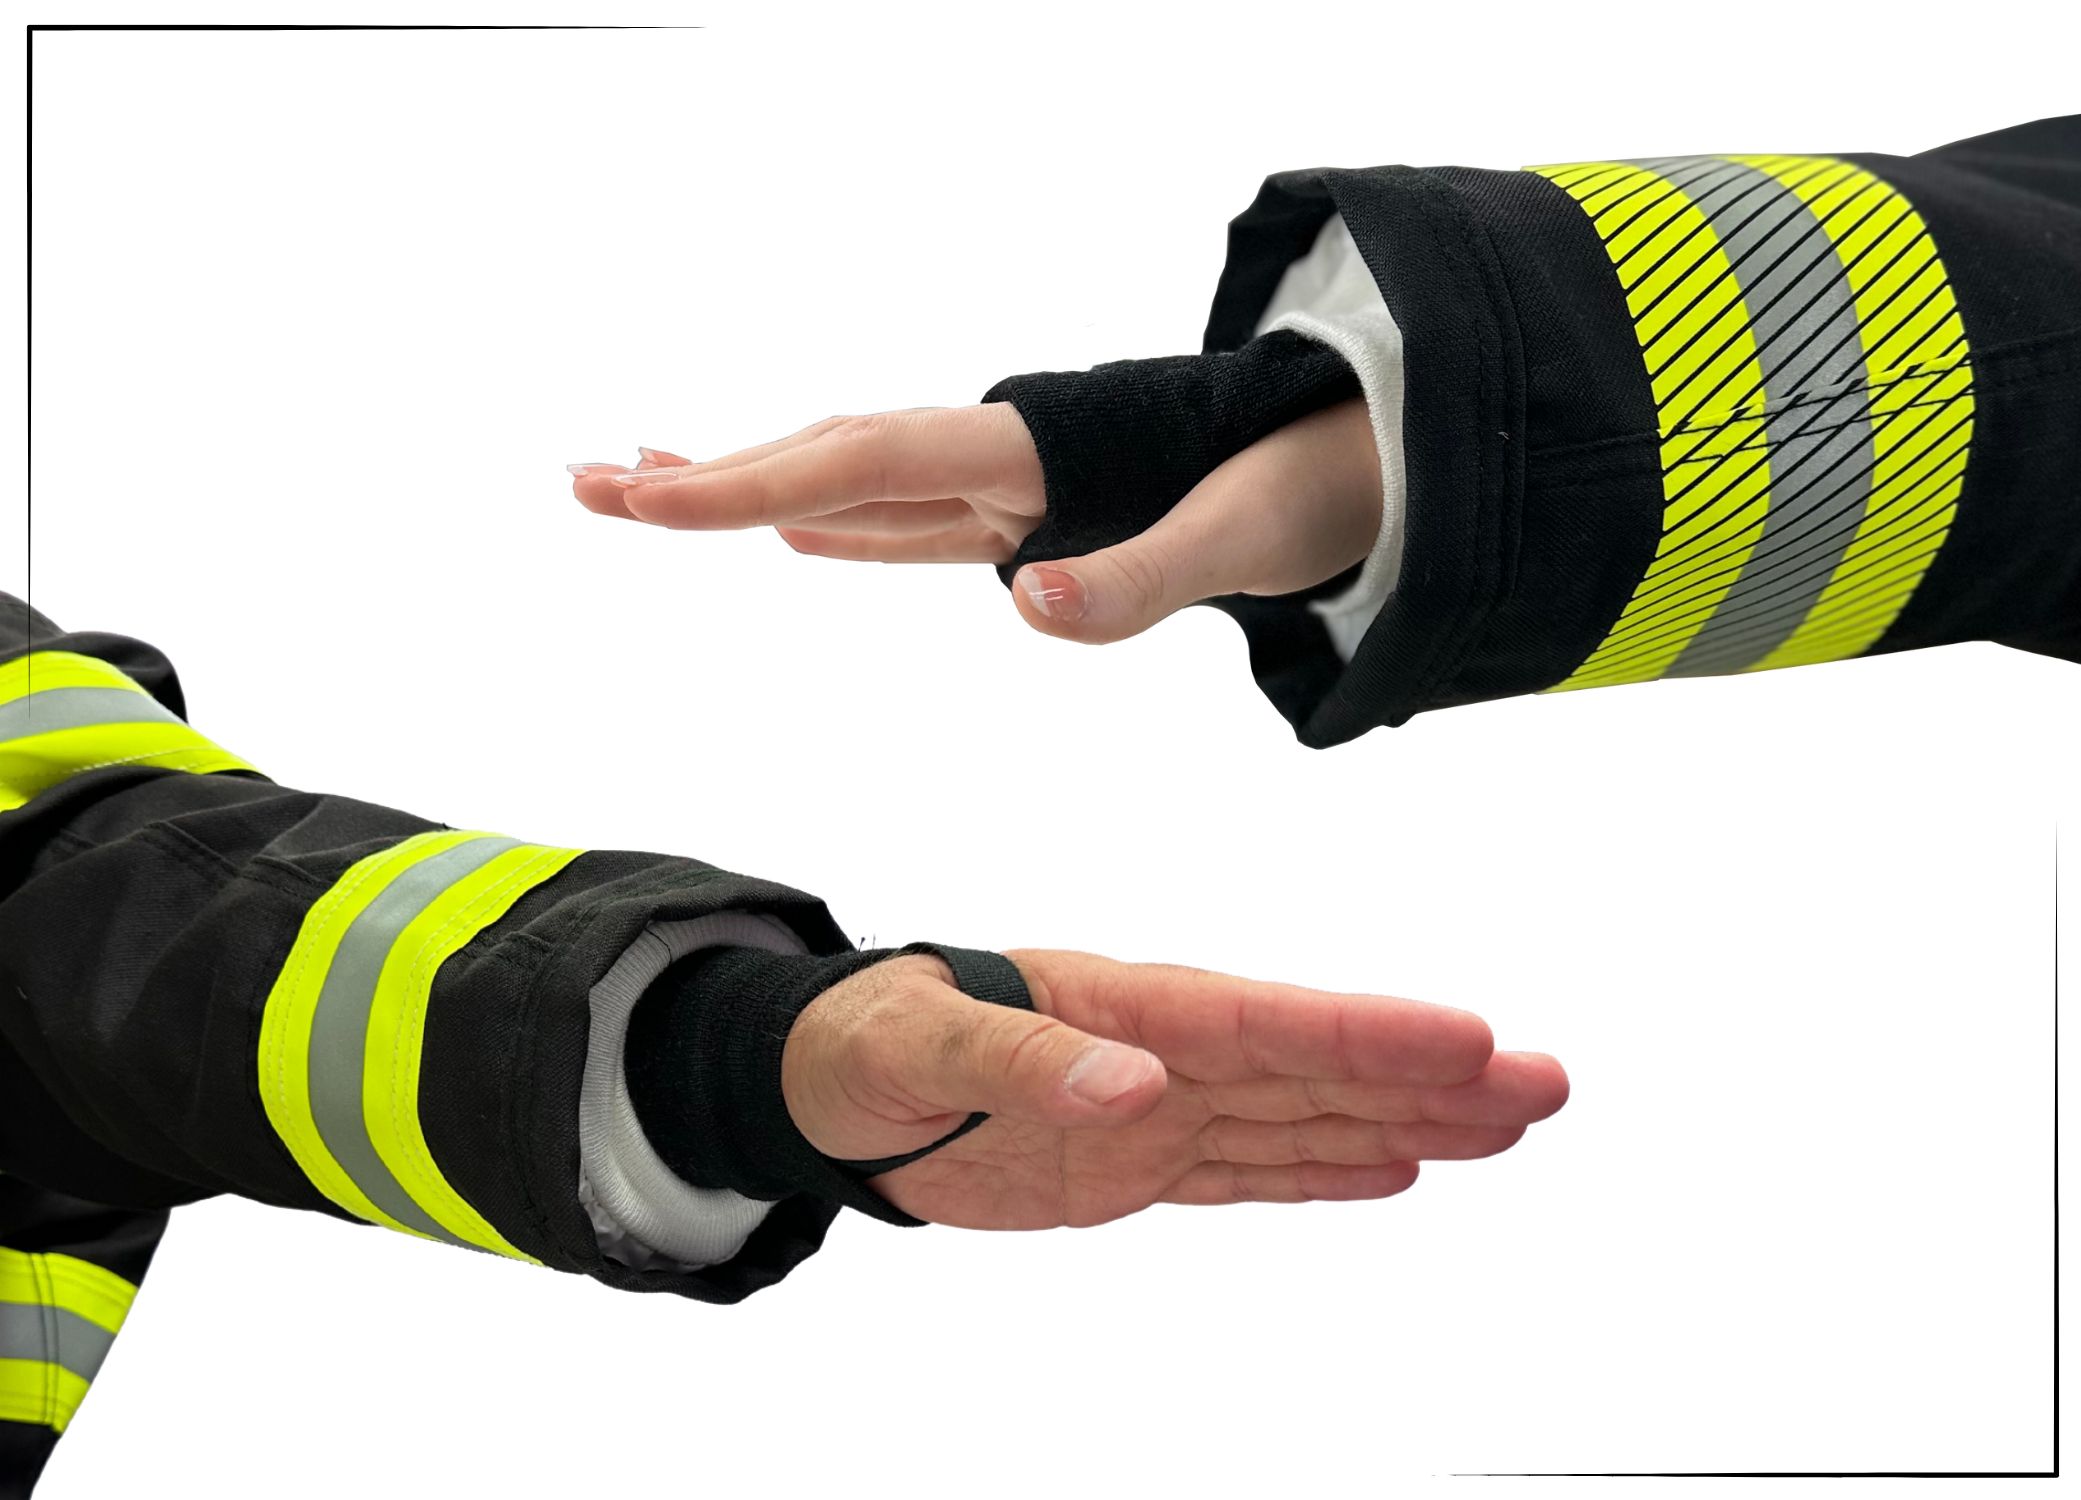 Nomex Wrist Guard Options Included